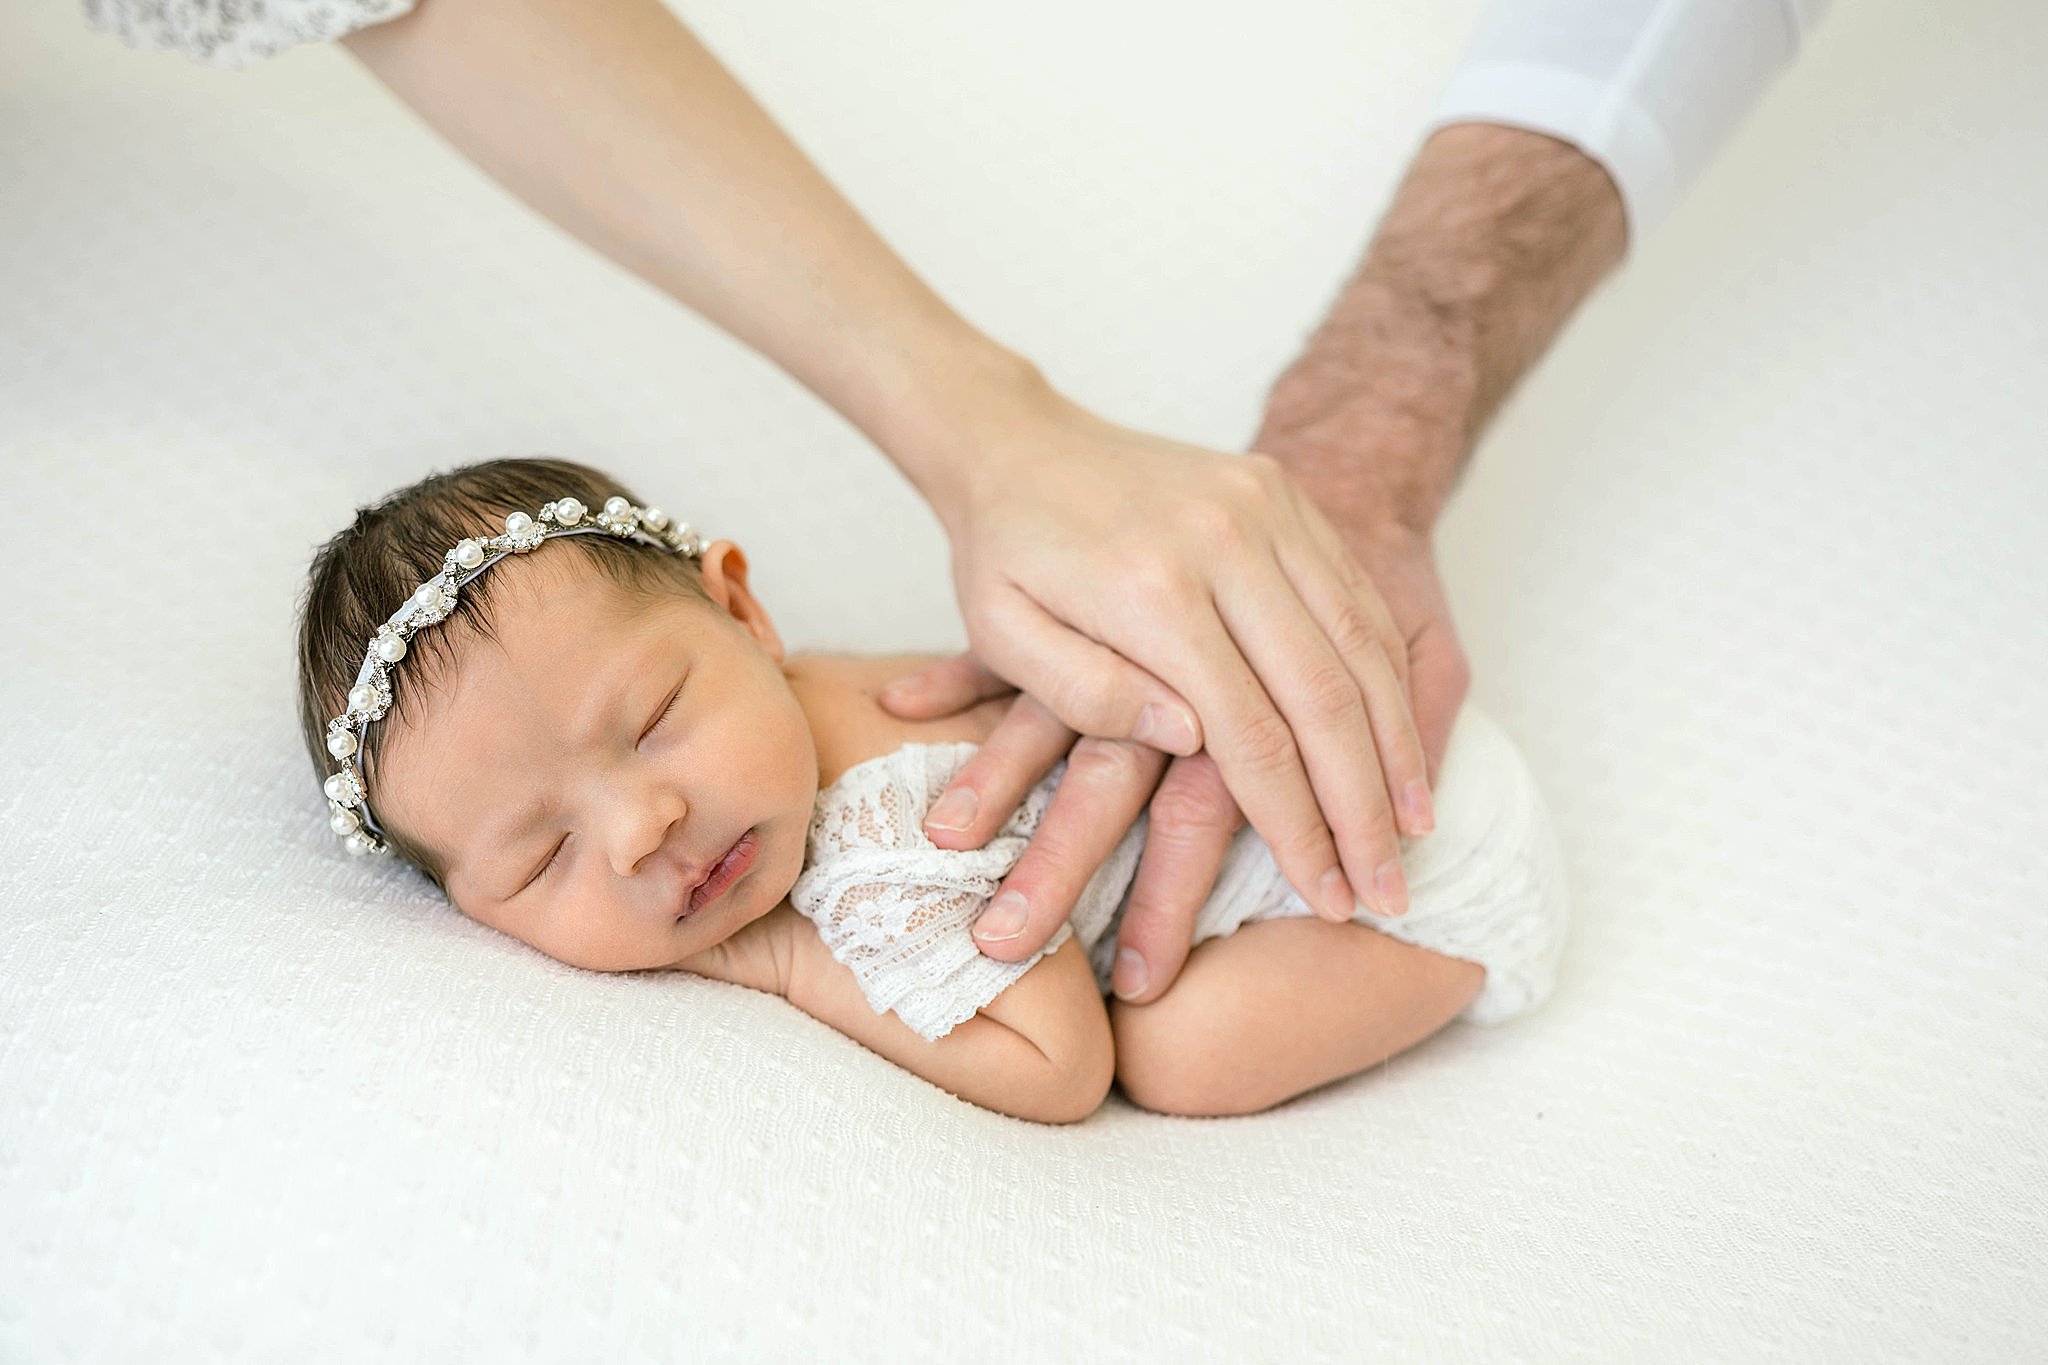 Parent each place a hand on their newborn baby girl while she sleeps on a white bed